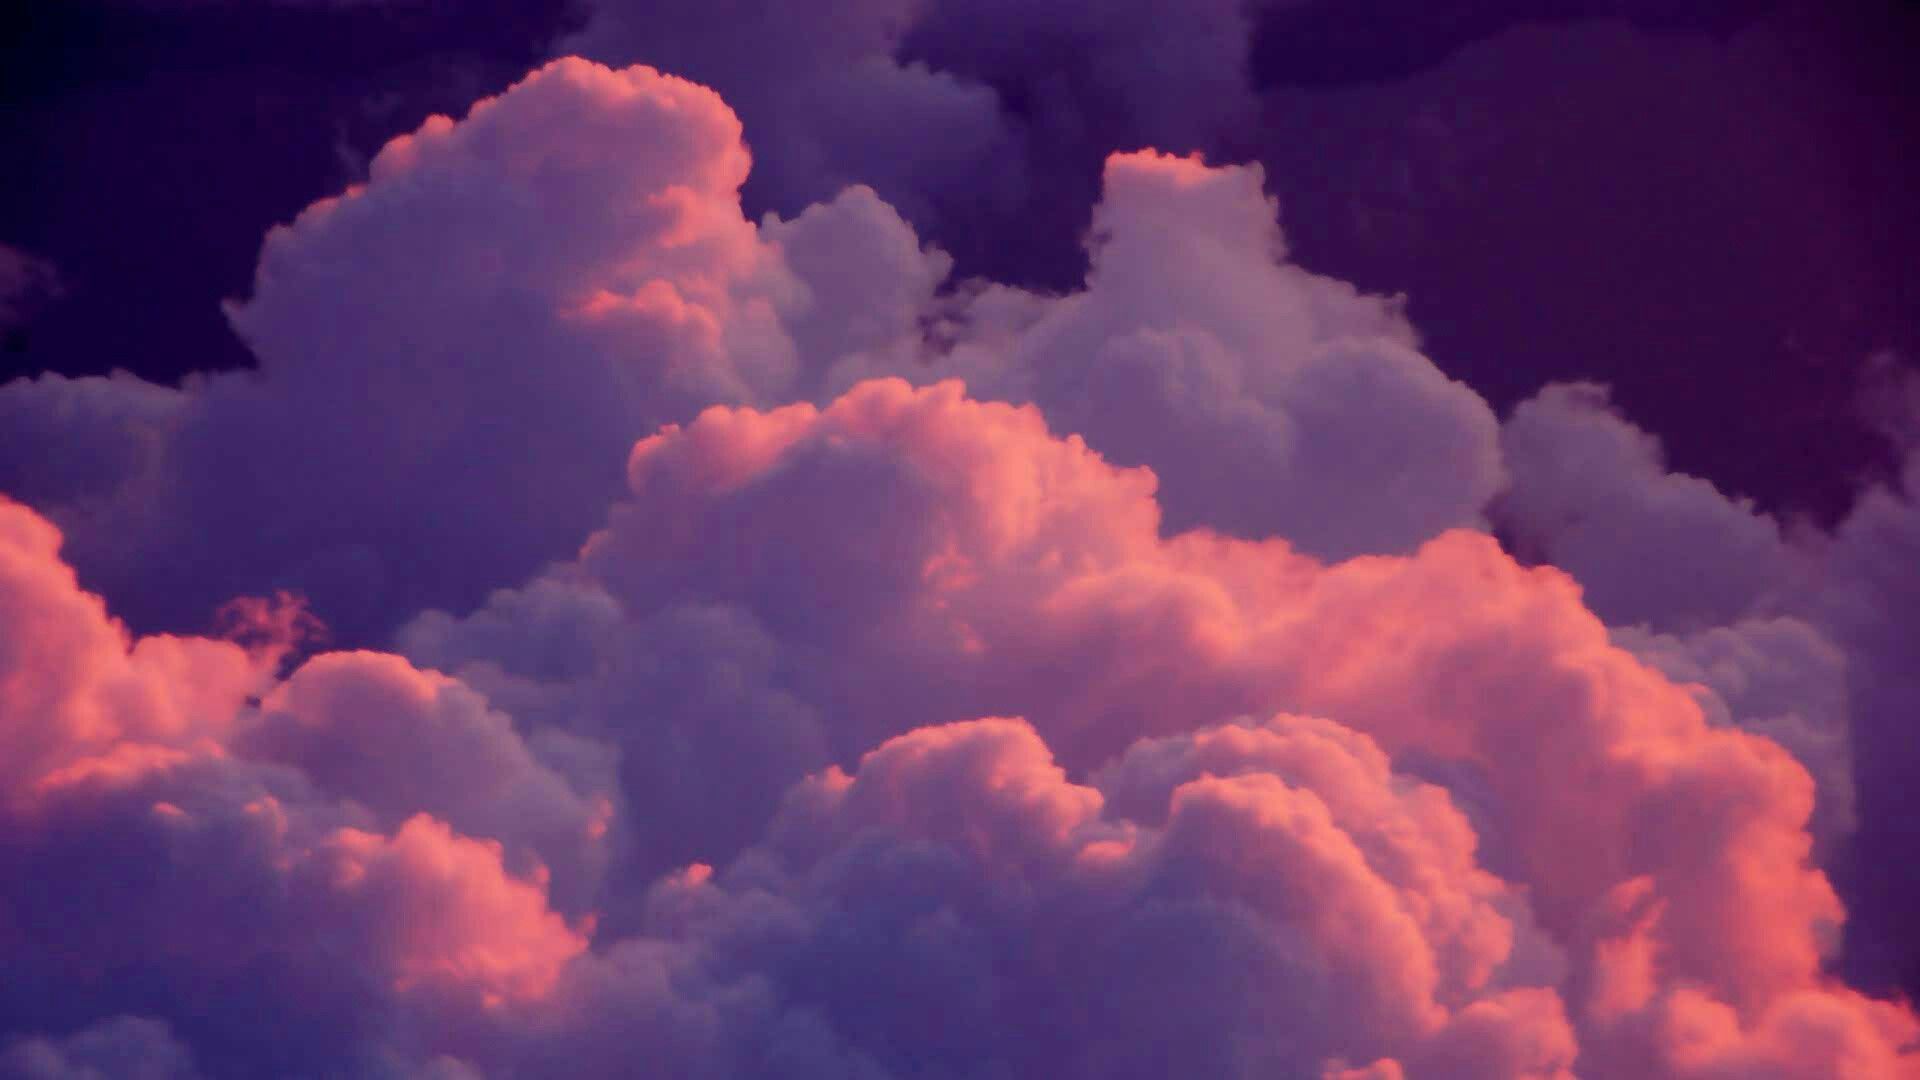 Image by Laura Matthews on clouds. Cloud wallpaper, Pink clouds